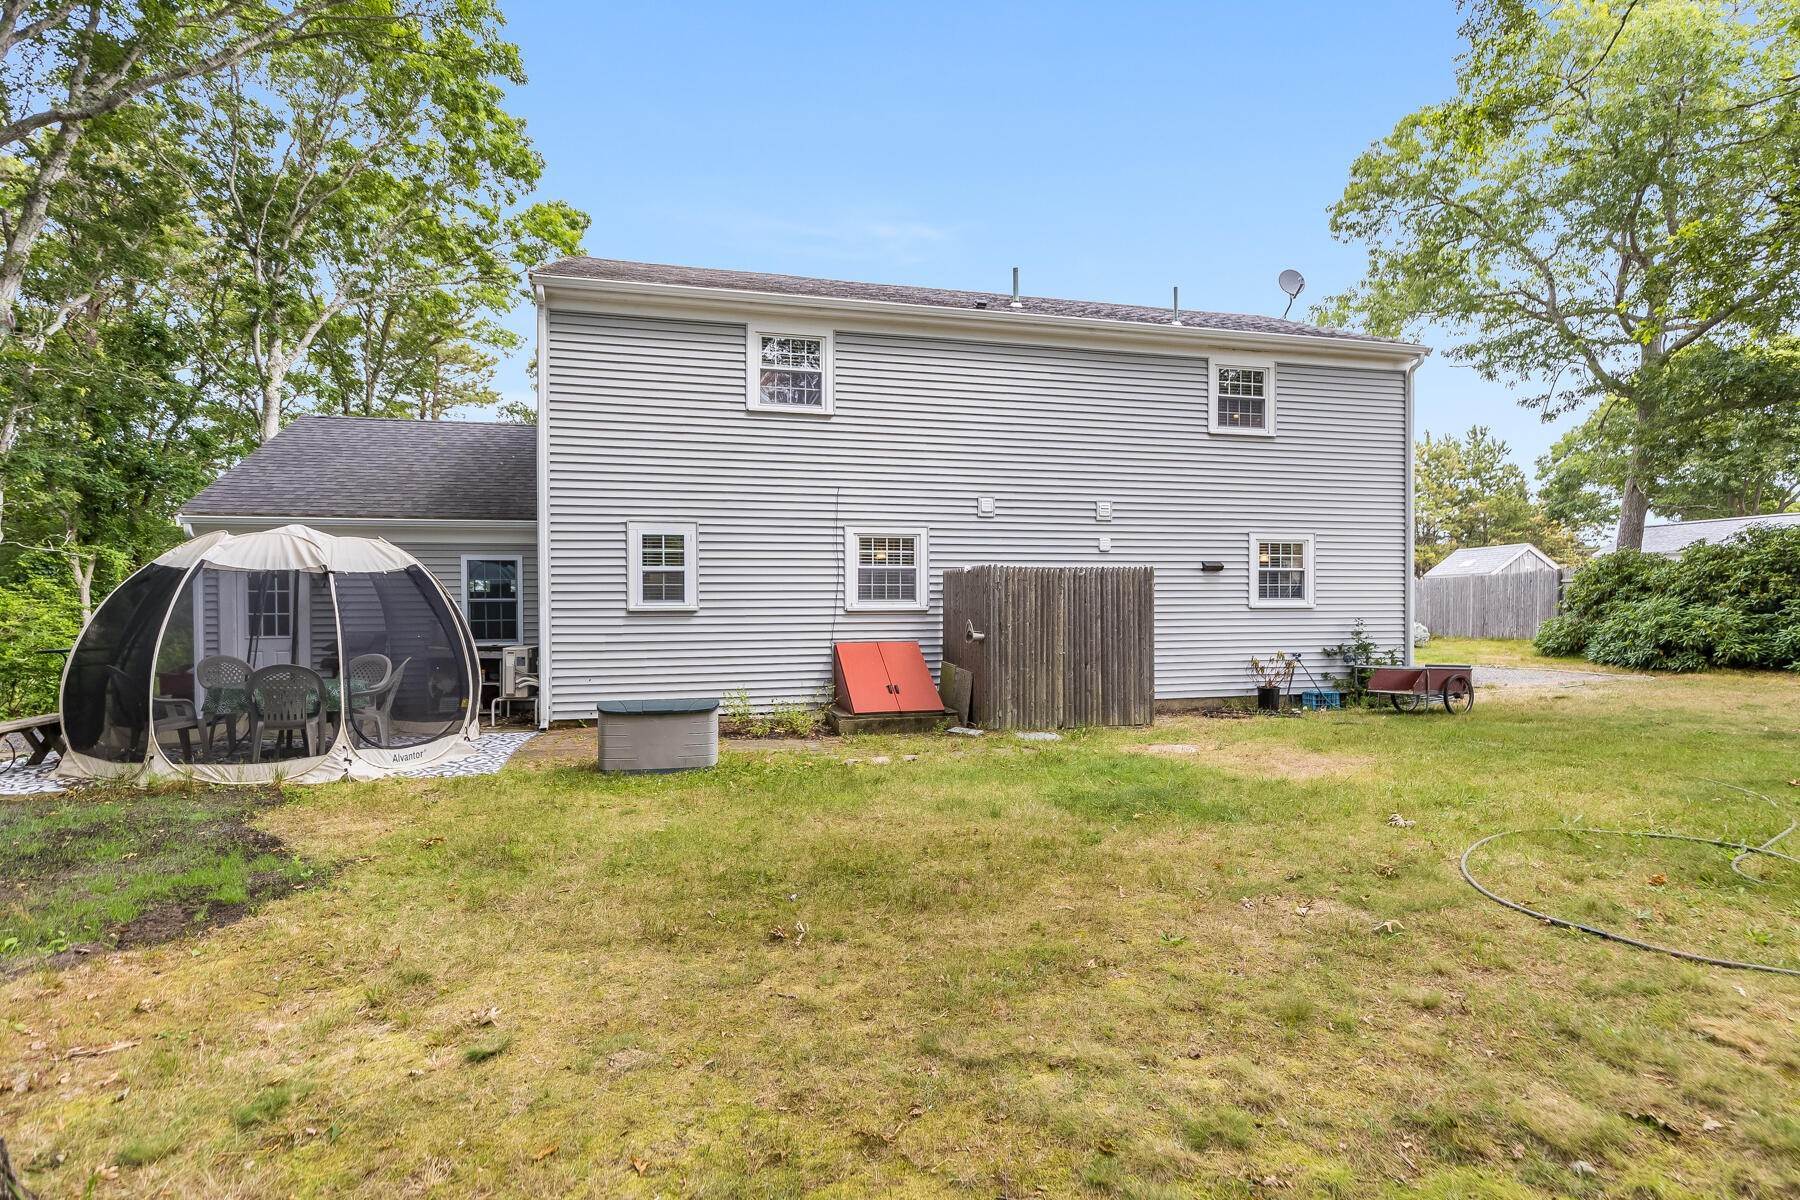 29. Duplex Homes for Sale at 8-10 Pawkannawkut Drive, South Yarmouth, MA, 02664 8-10 Pawkannawkut Drive Yarmouth, Massachusetts 02664 United States